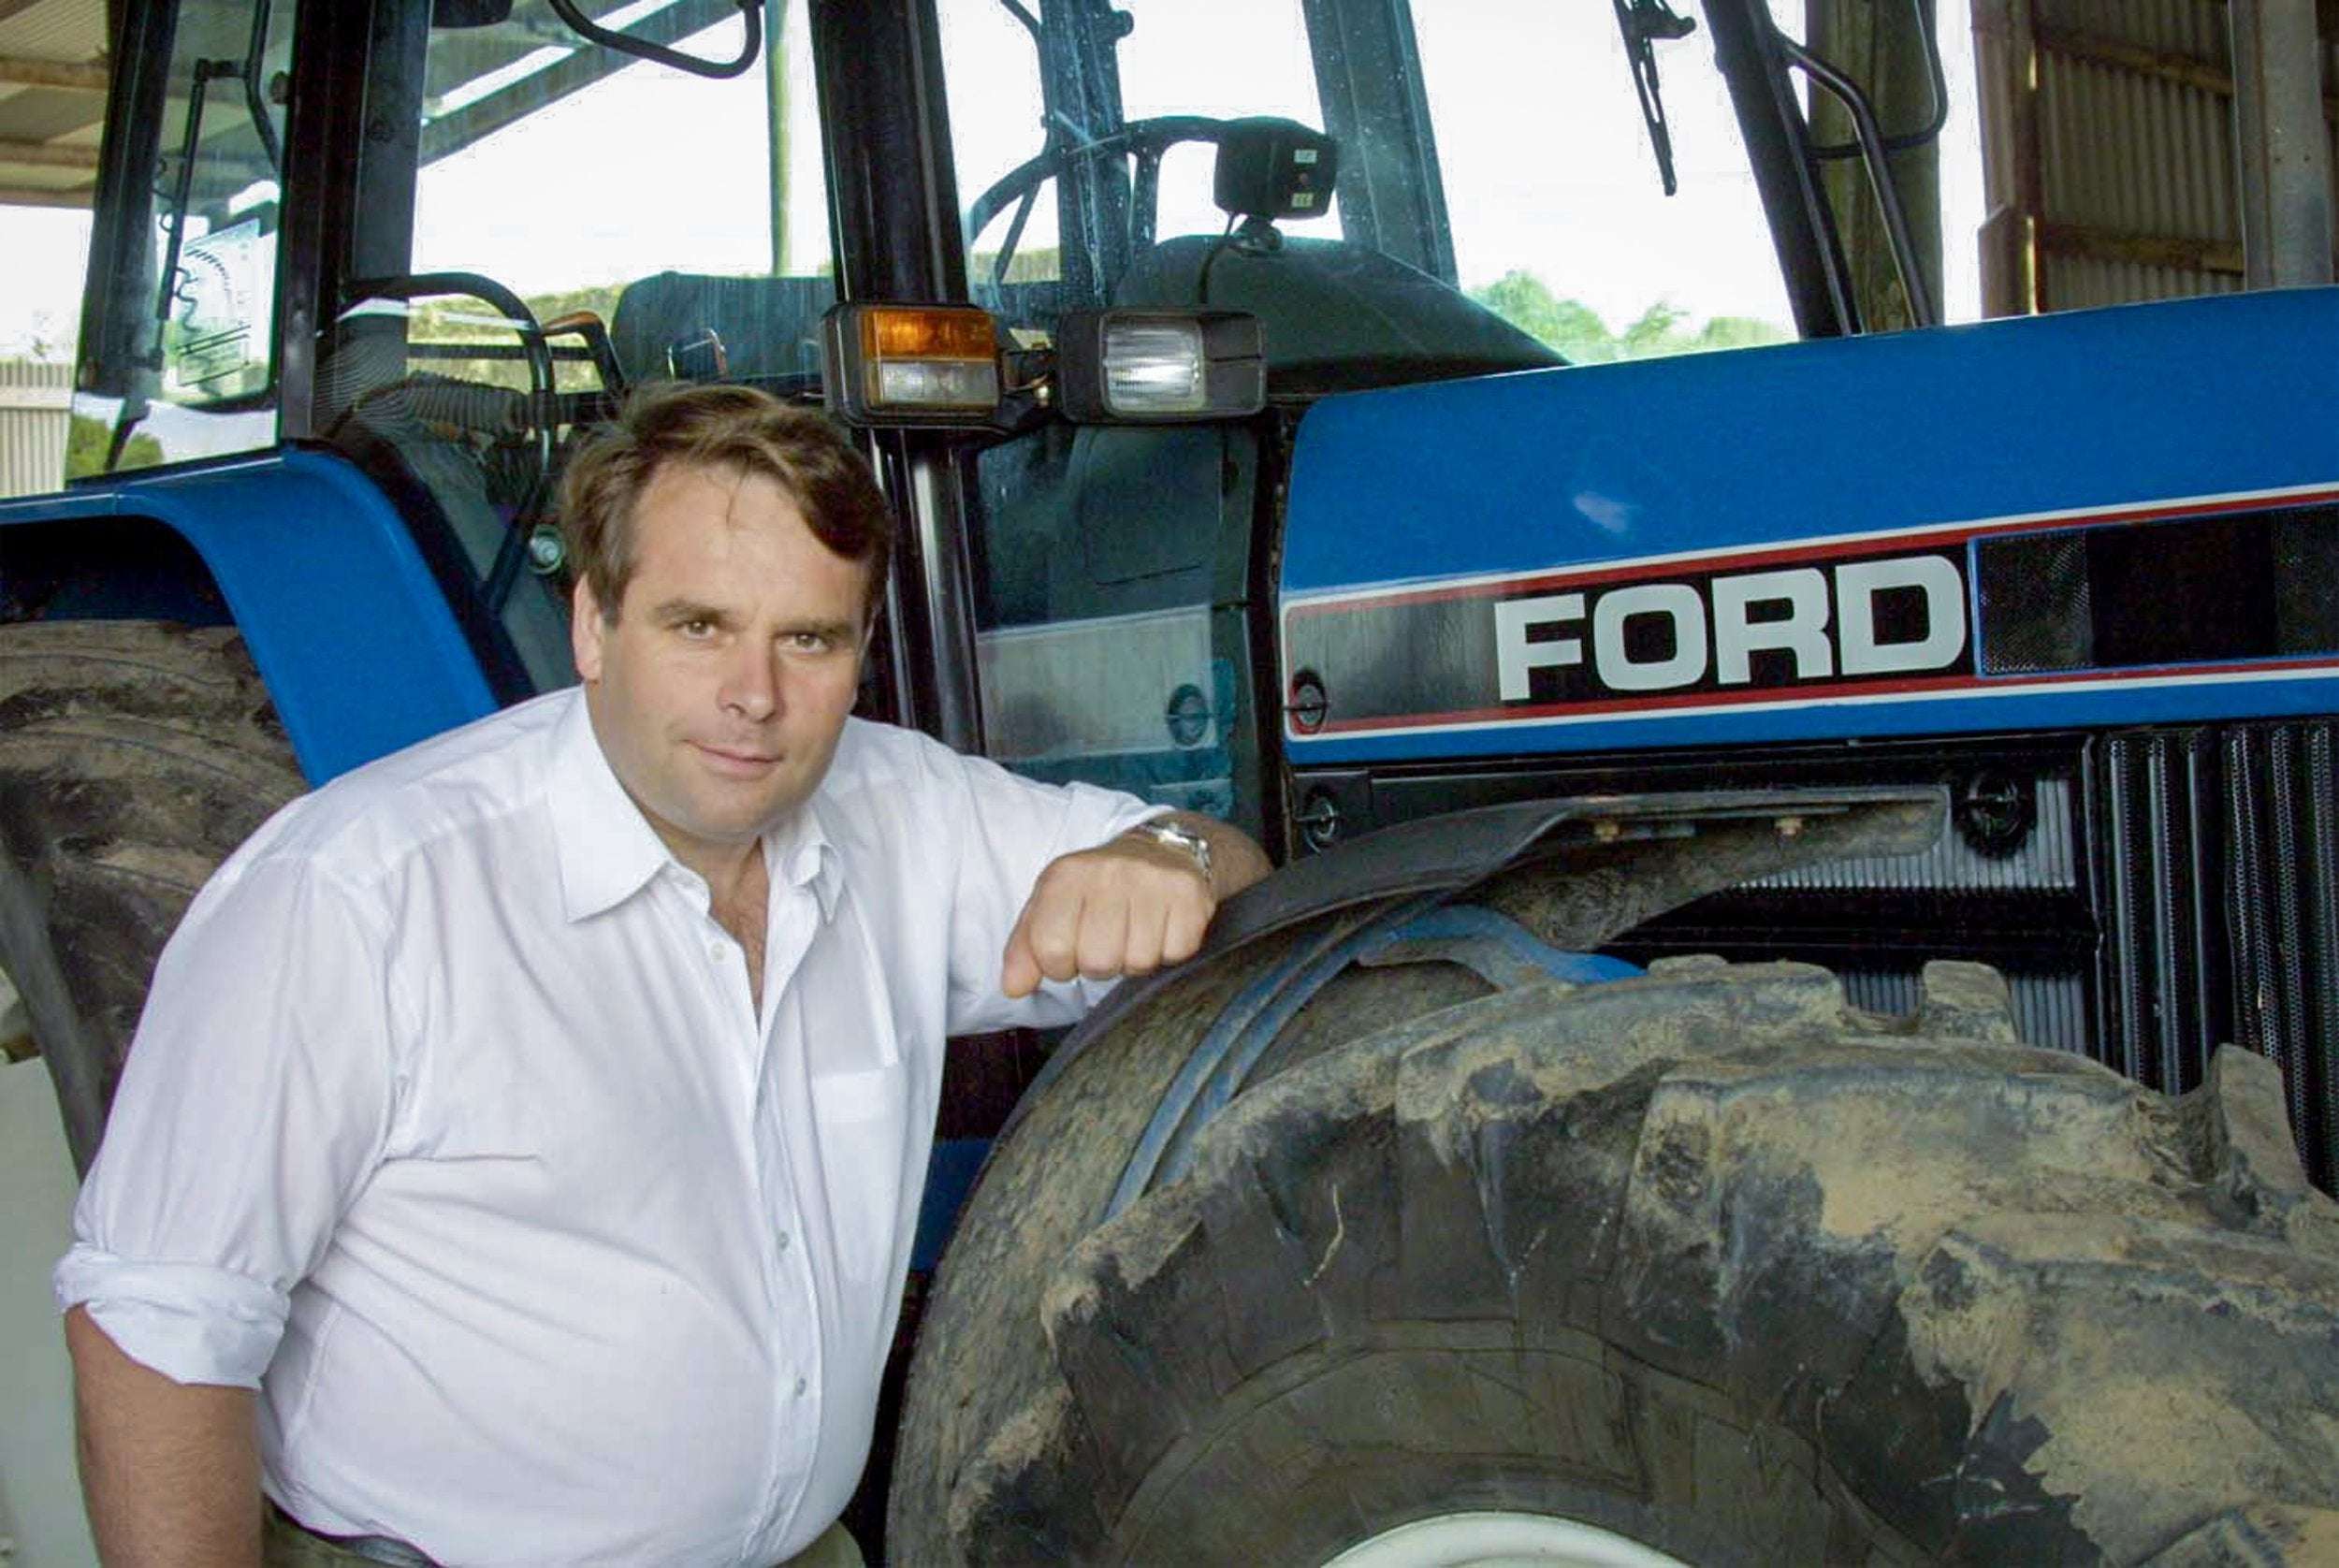 image for ‘Porn MP’ Neil Parish may have been looking for a Claas Dominator tractor, allies suggest